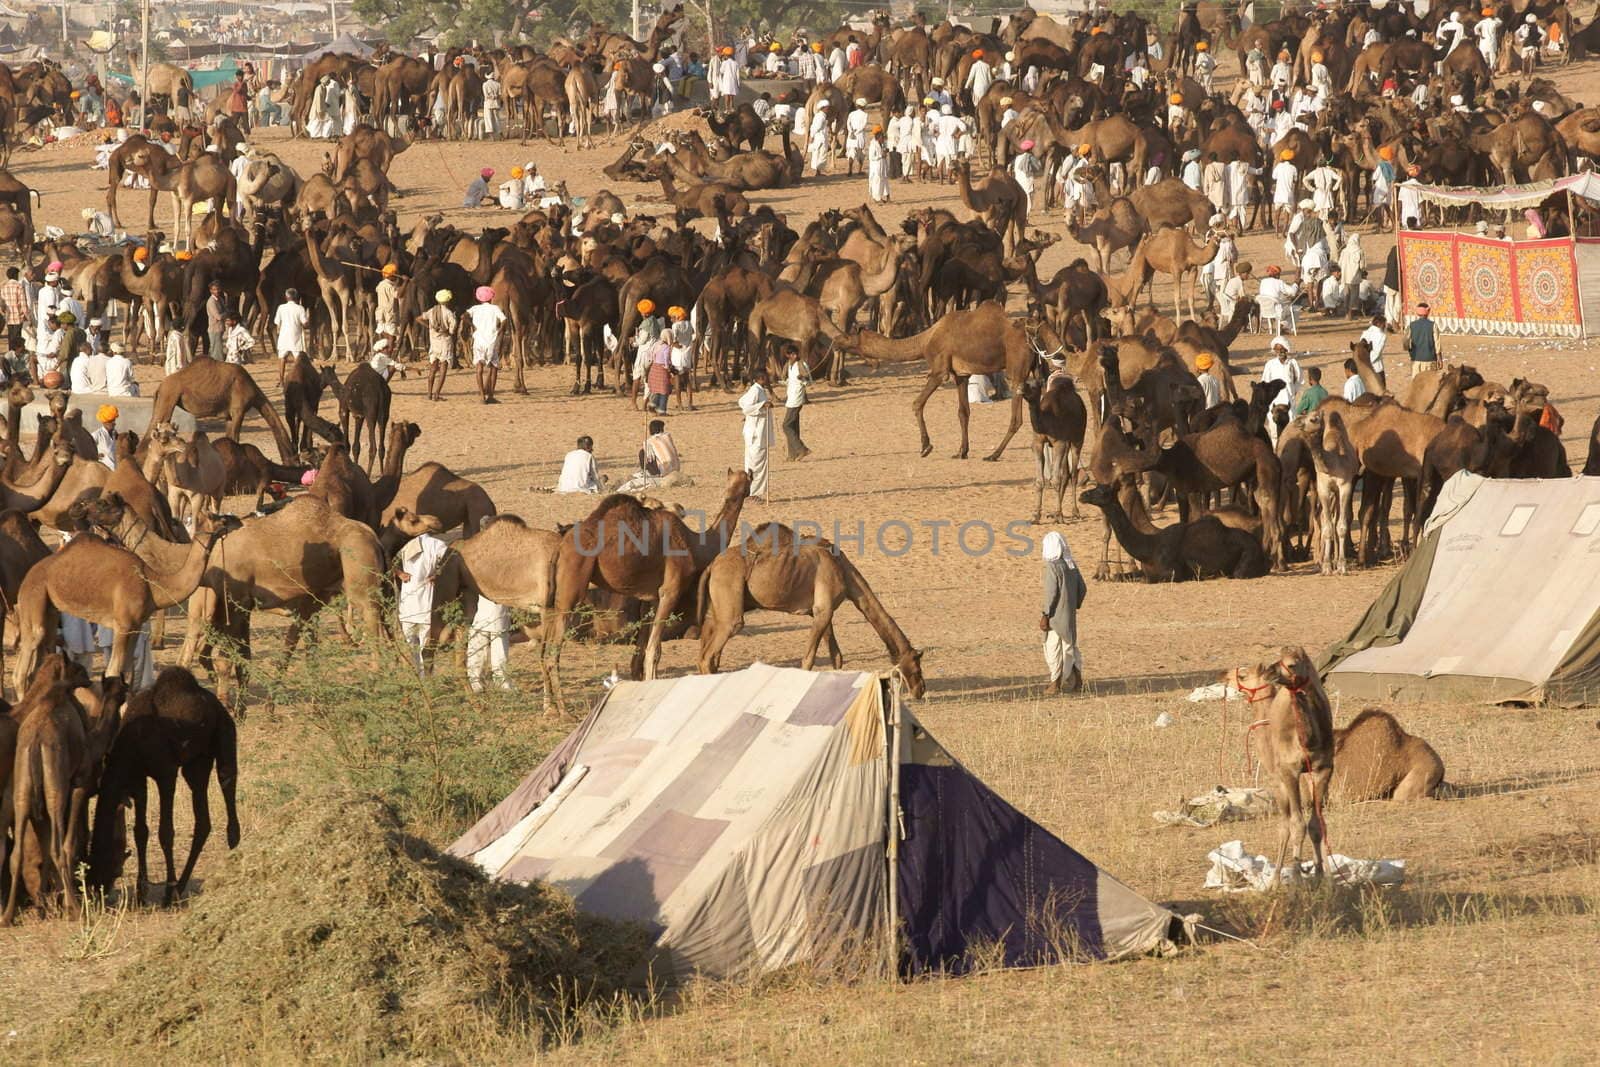 Camels as far as the eye can see at the annual livestock fair in Pushkar, Rajasthan, India